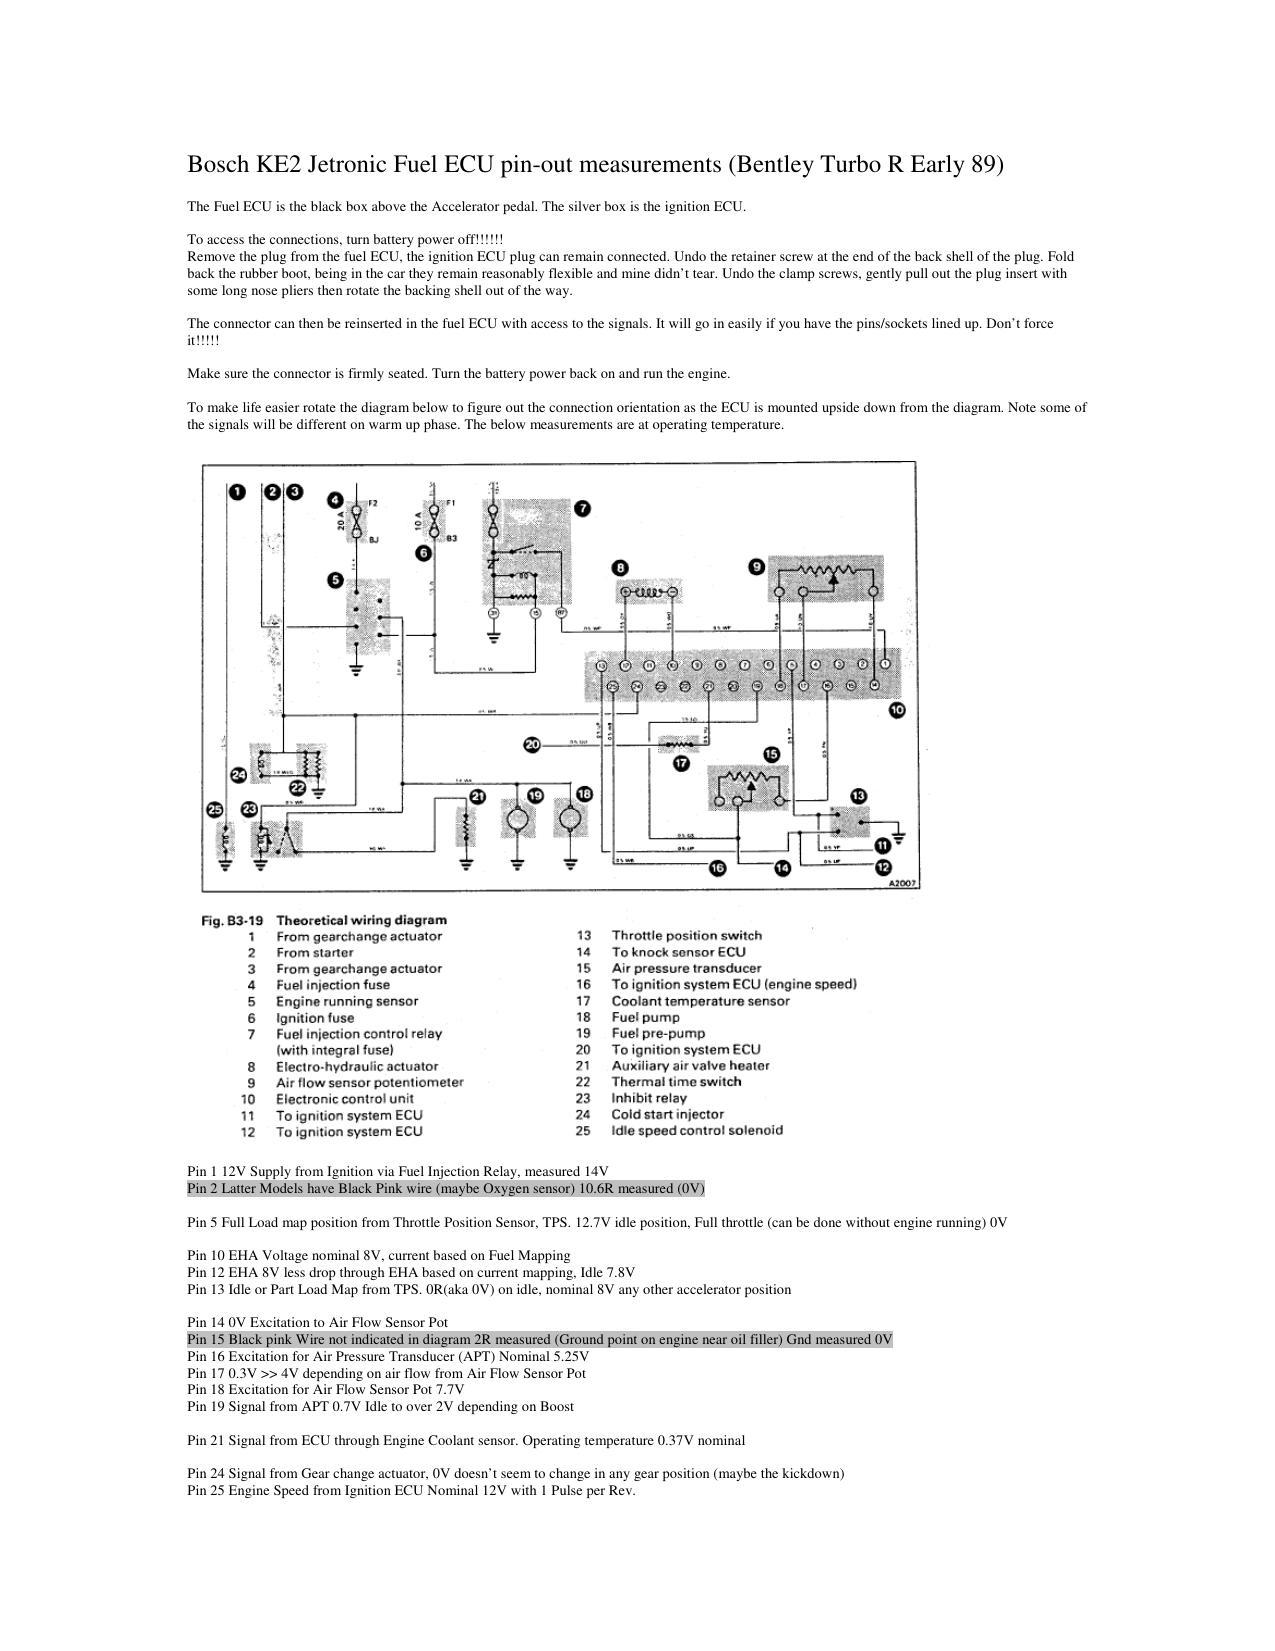 bentley-turbo-r-early-89-fuel-ecu-pin-out-measurements-manual.pdf